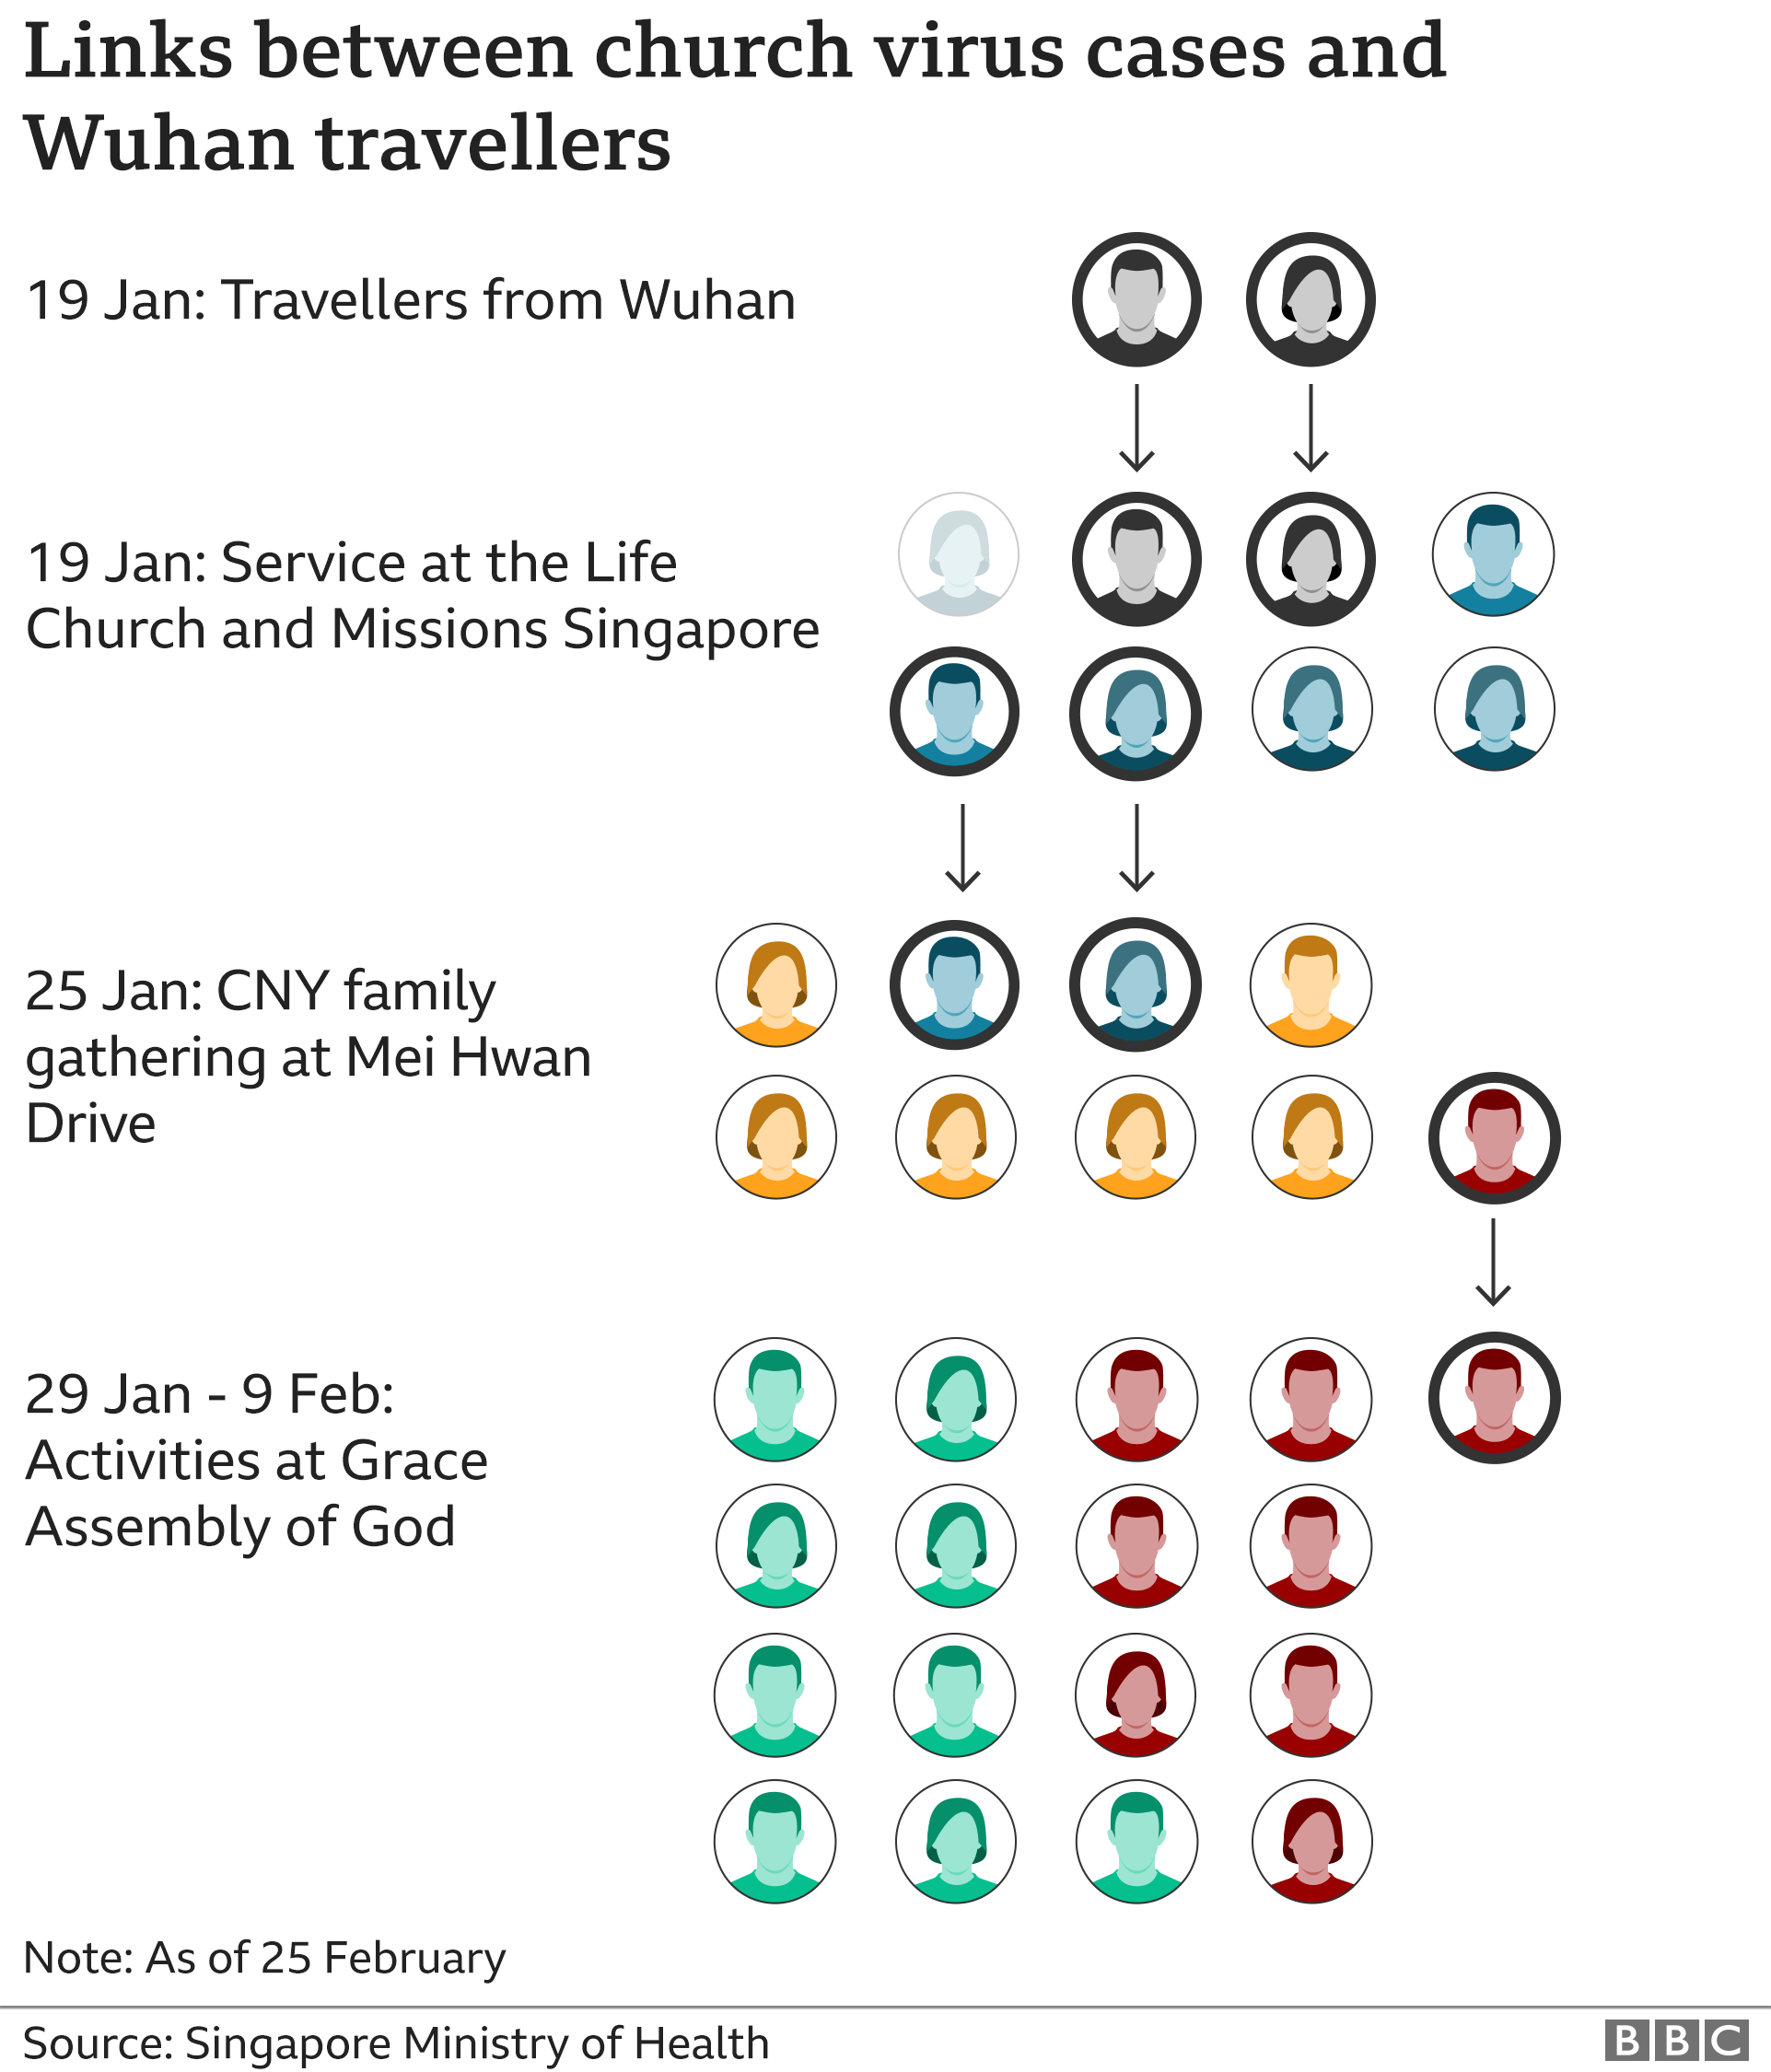 Graphic showing links between church virus cases and Wuhan travellers